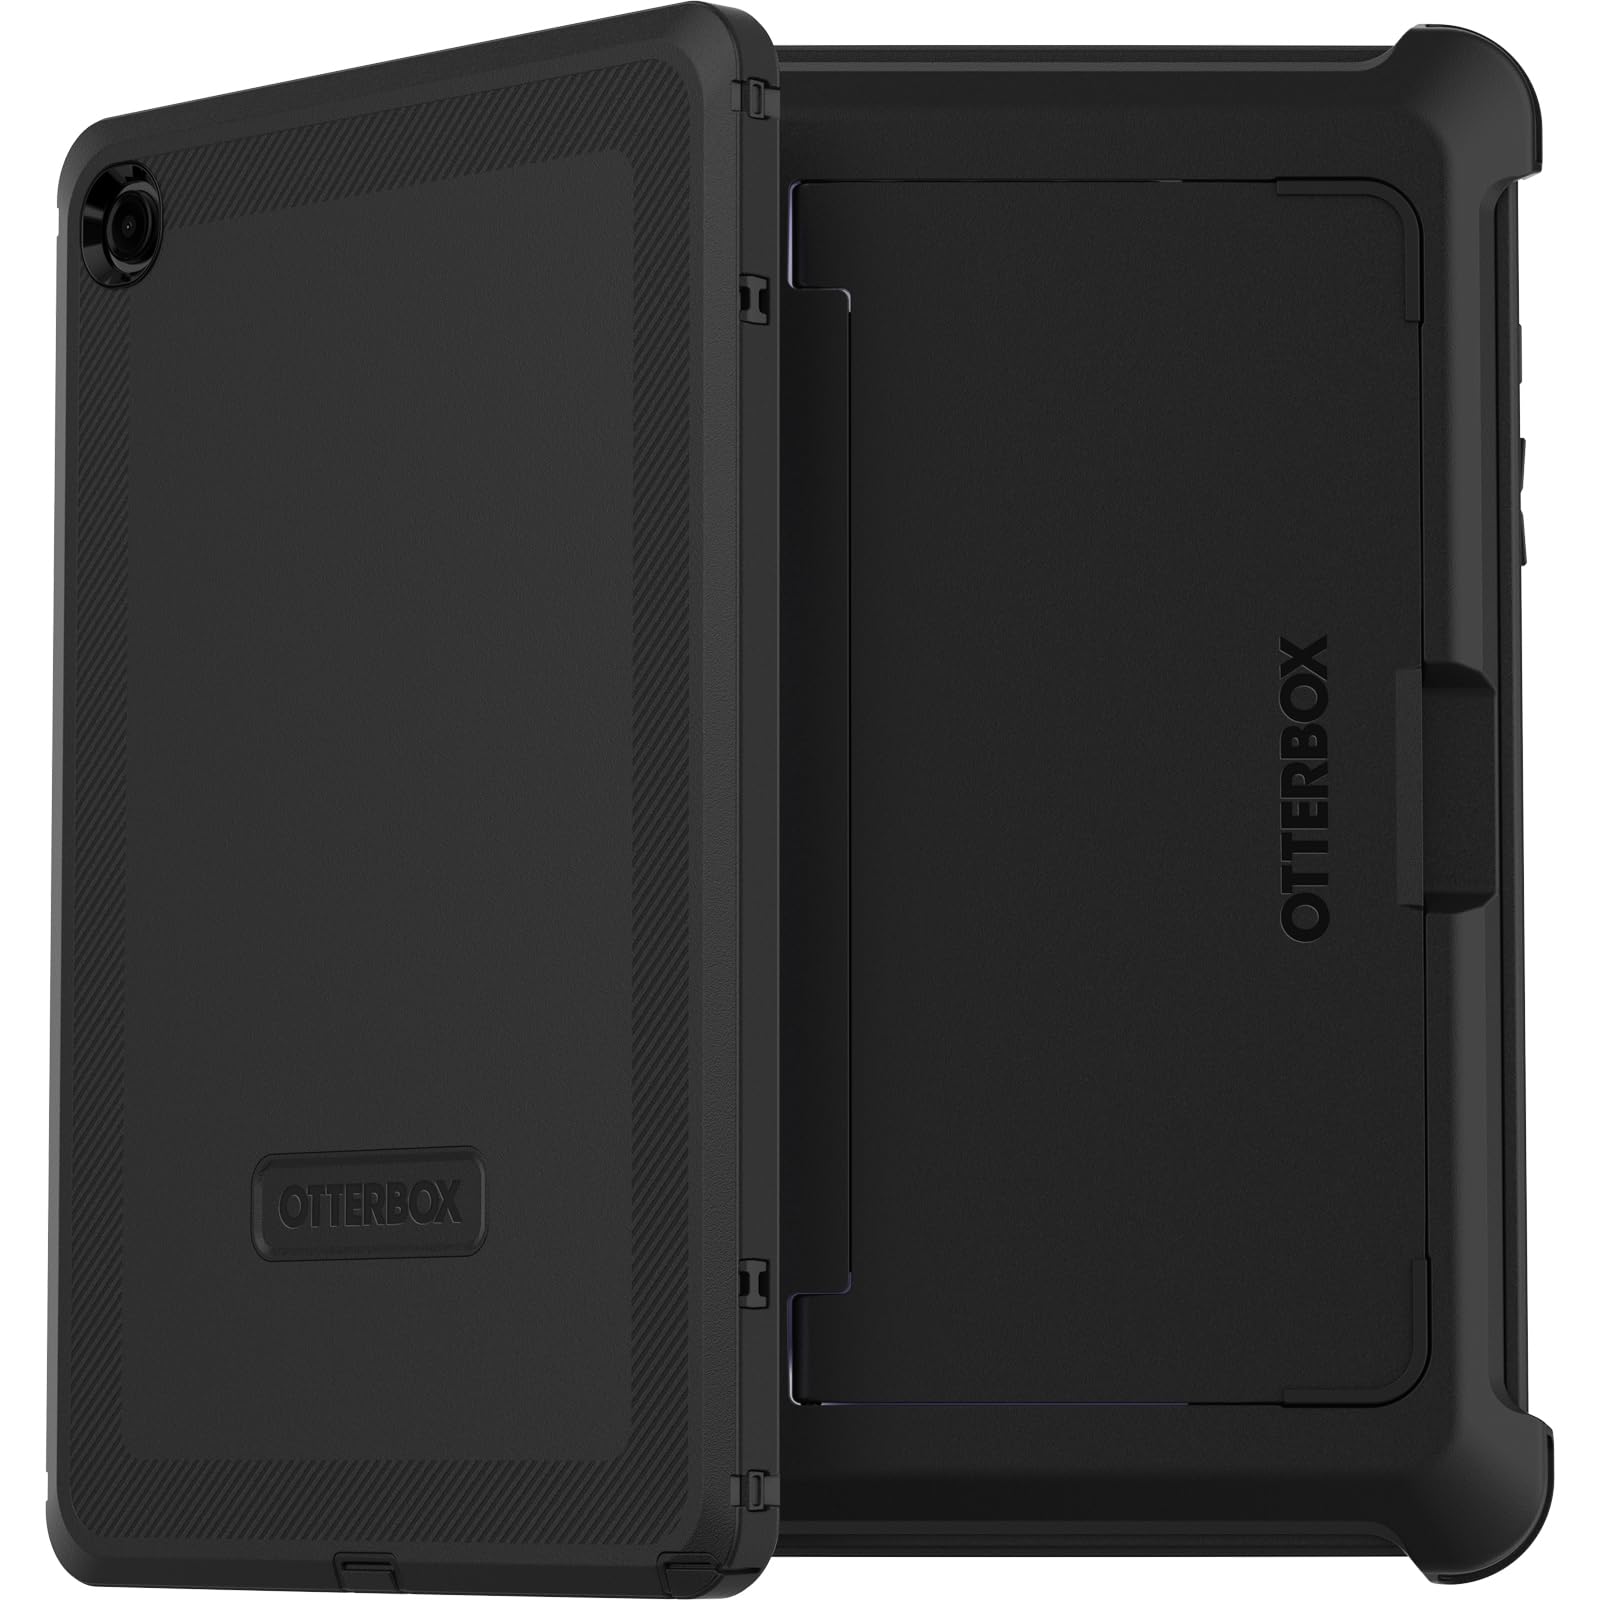 OtterBox Defender Series case for Samsung Galaxy Tab A9+ - Black (Single Unit Ships in polybag, Ideal for Business customers)